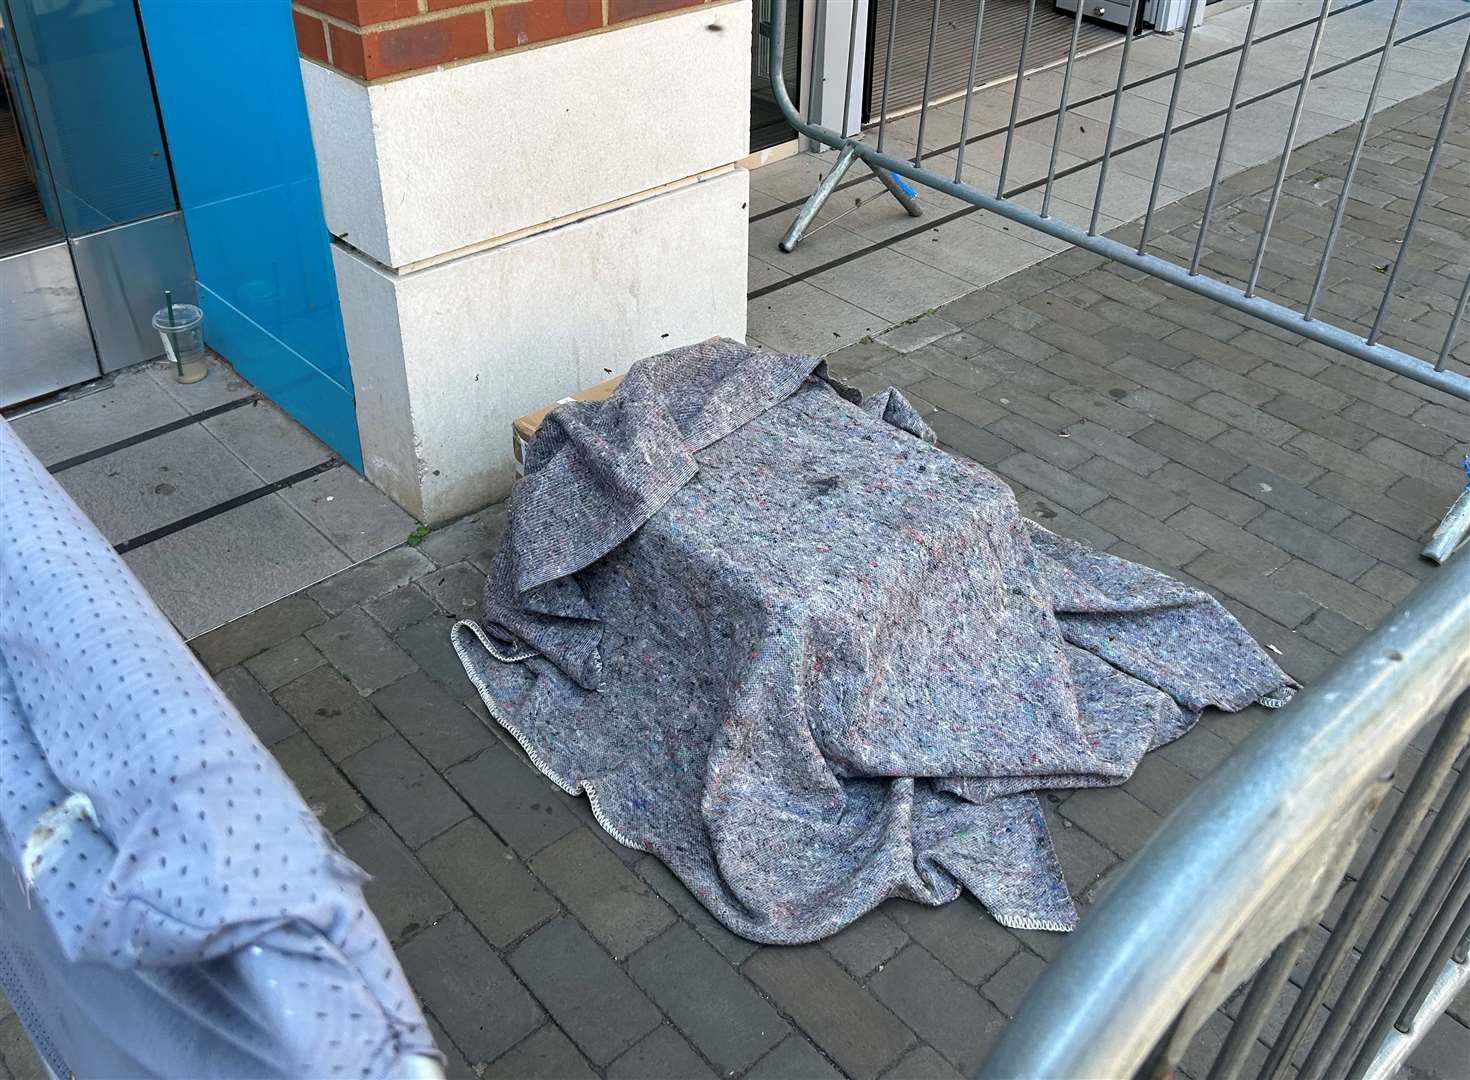 The beekeeper left a hole in the box for bees to get into after a swarm was discovered outside Primark in Canterbury Whitefriars